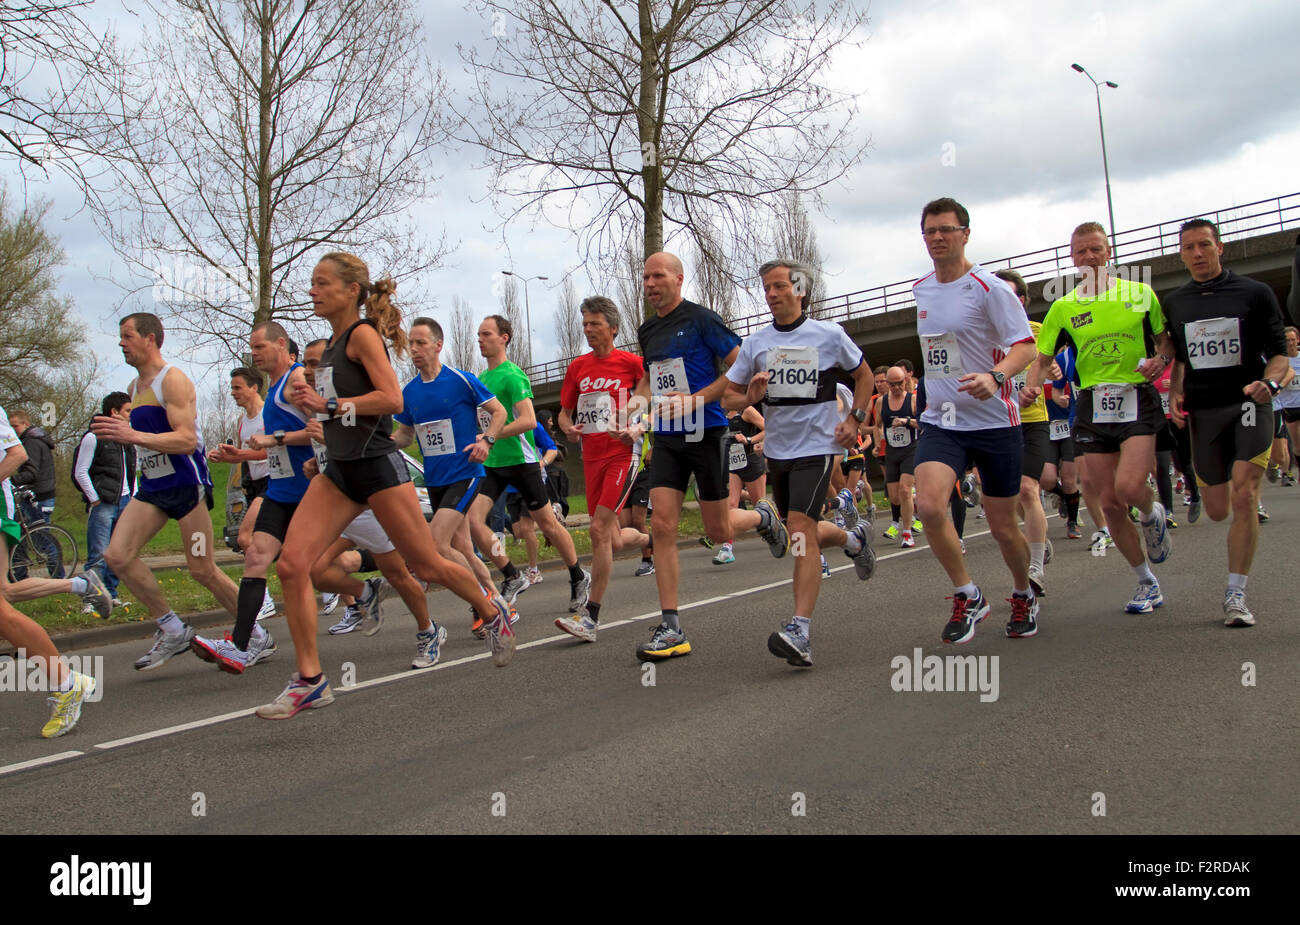 The 65th edition Dwars door Dordt on Sunday 1 April 2012. Runners race off fast at the start of the race Stock Photo